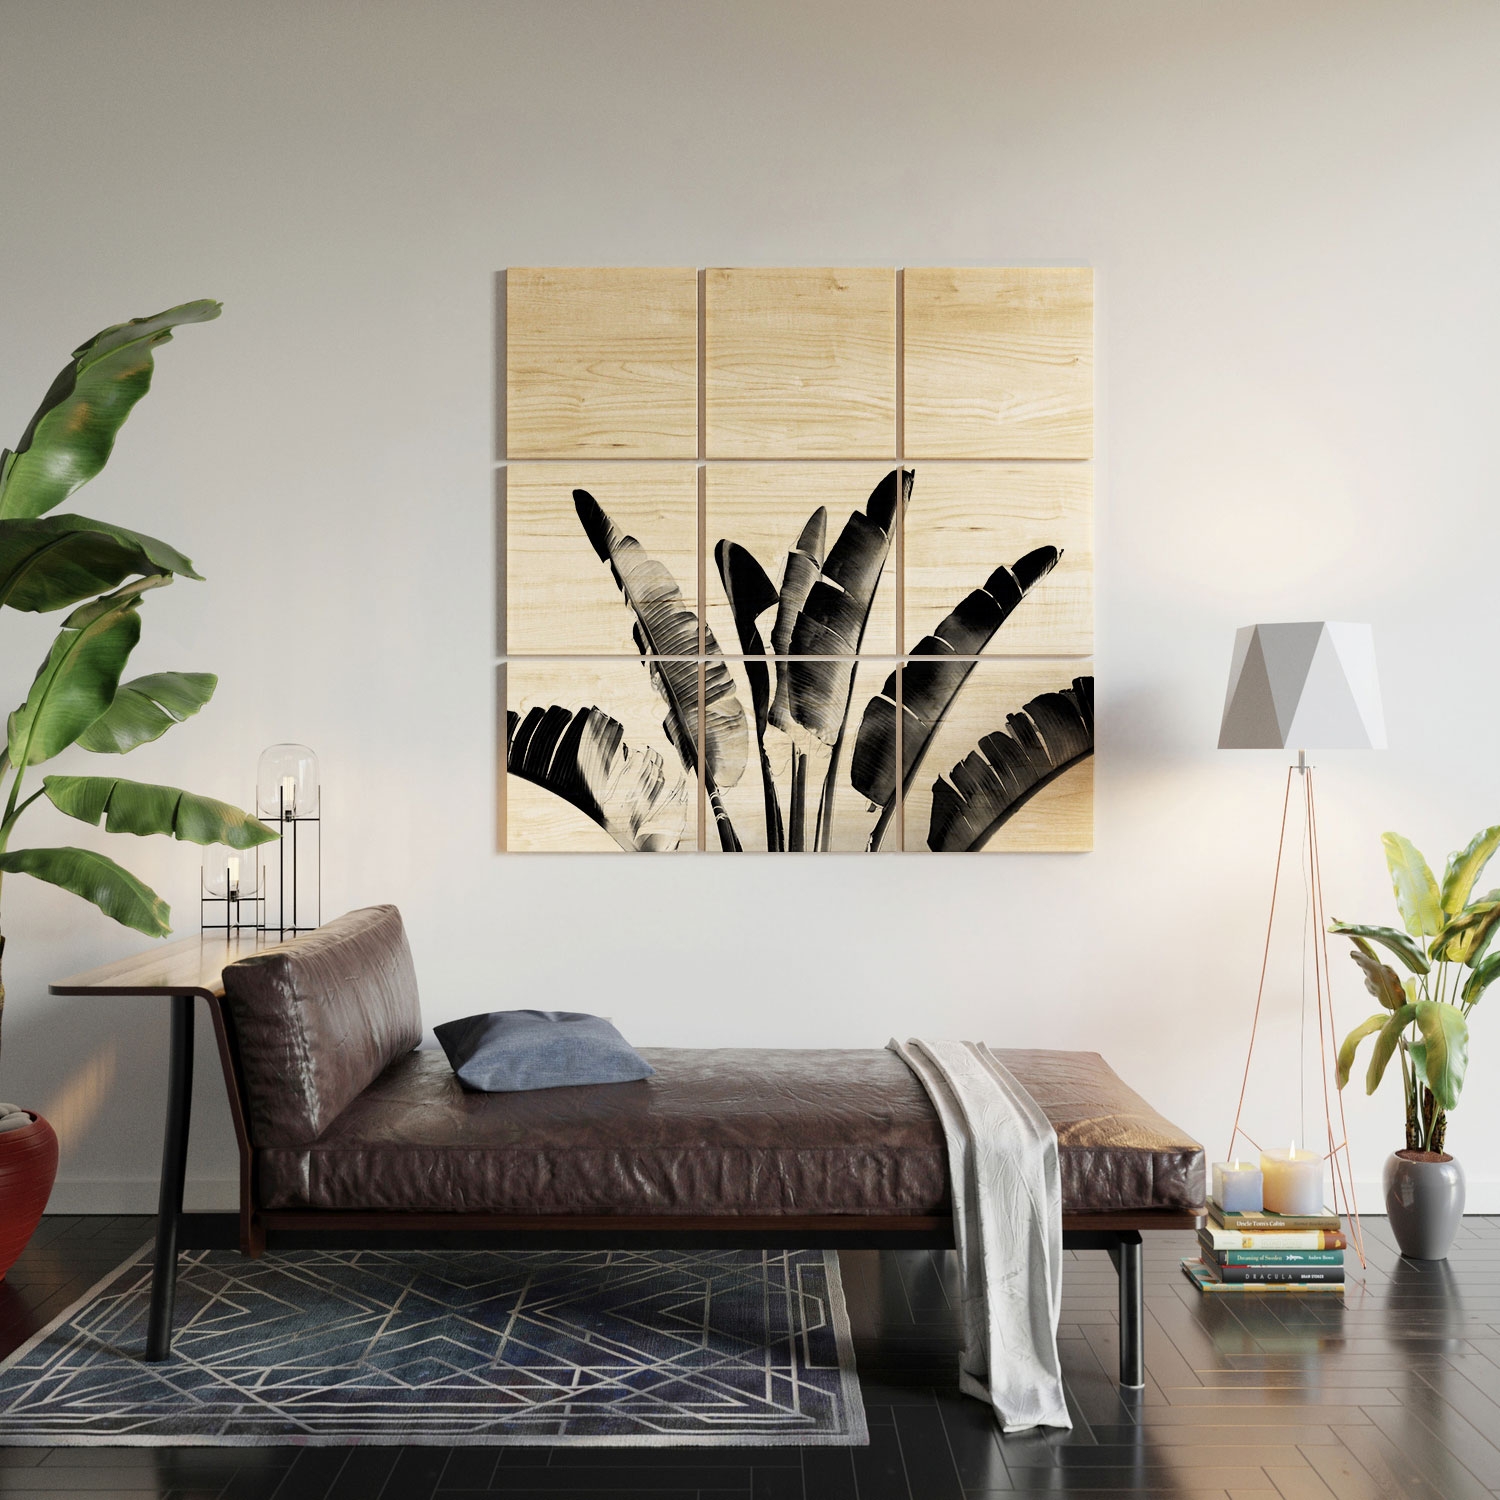 Traveler Palm Bw by Gale Switzer - Wood Wall Mural5' x 5' (Nine 20" wood Squares) - Image 1